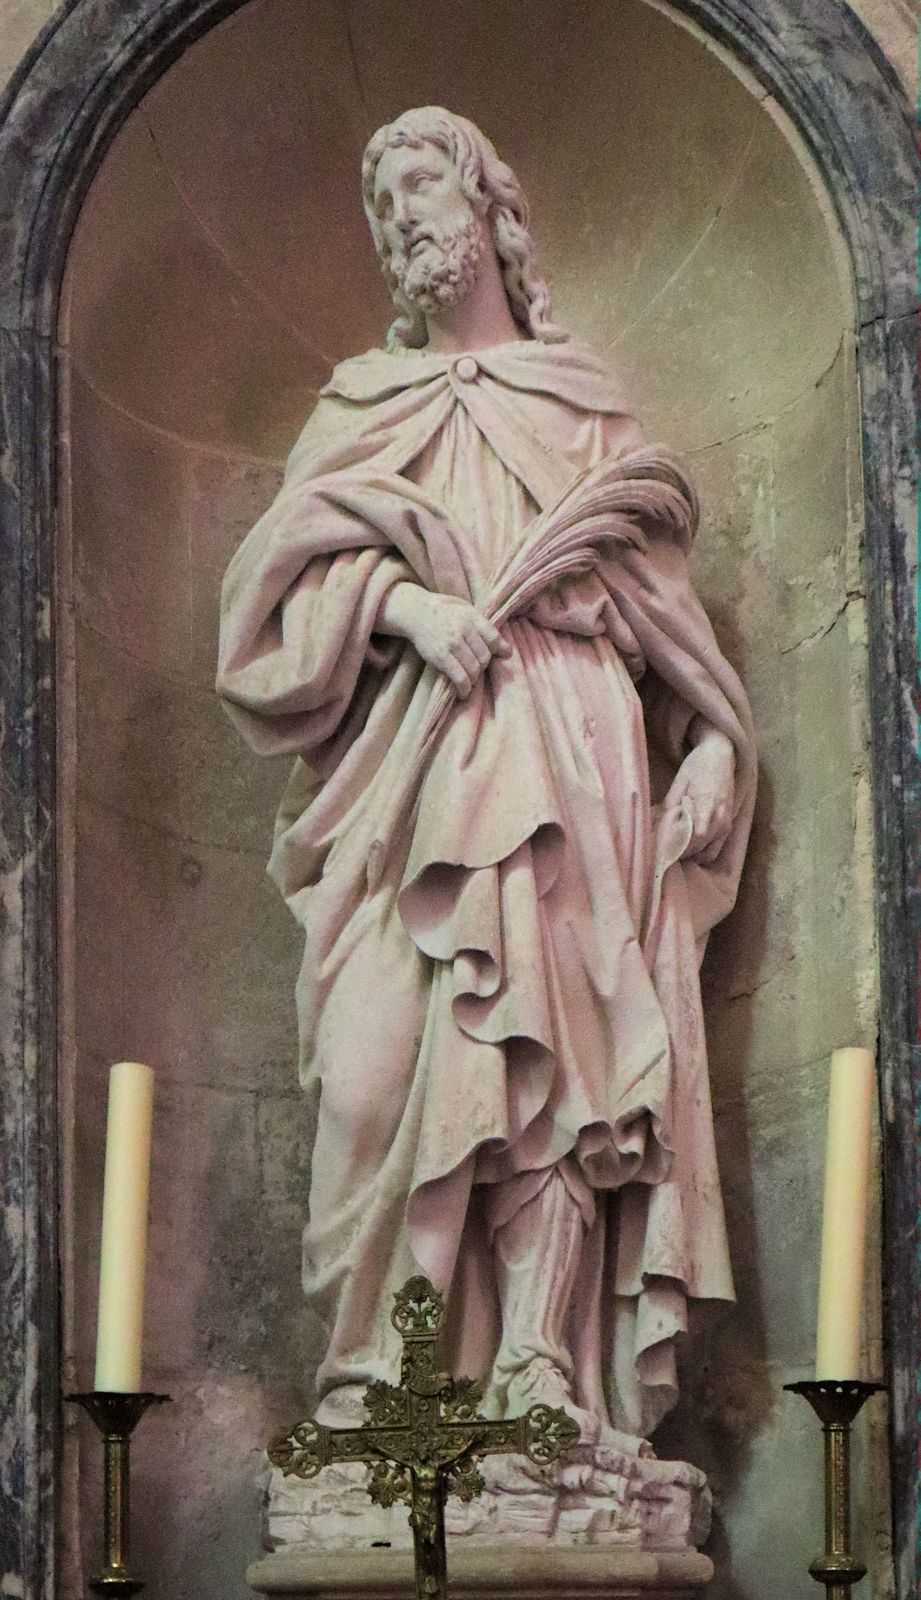 Rufinus-Statue in der Kathedrale in Soissons